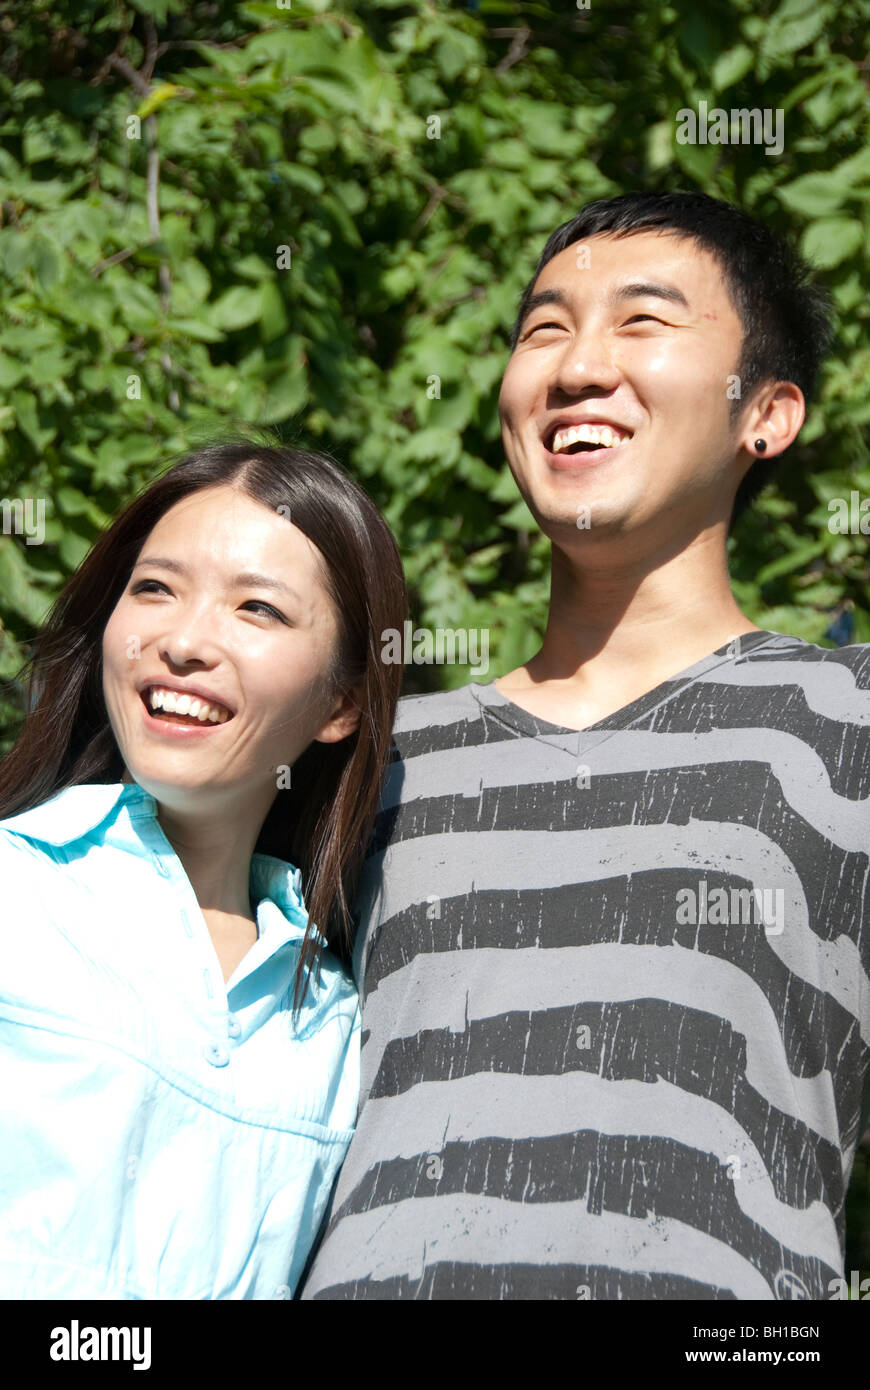 Young couple of Asian ethnicity in Assiniboine Park, Winnipeg, Manitoba, Canada Stock Photo